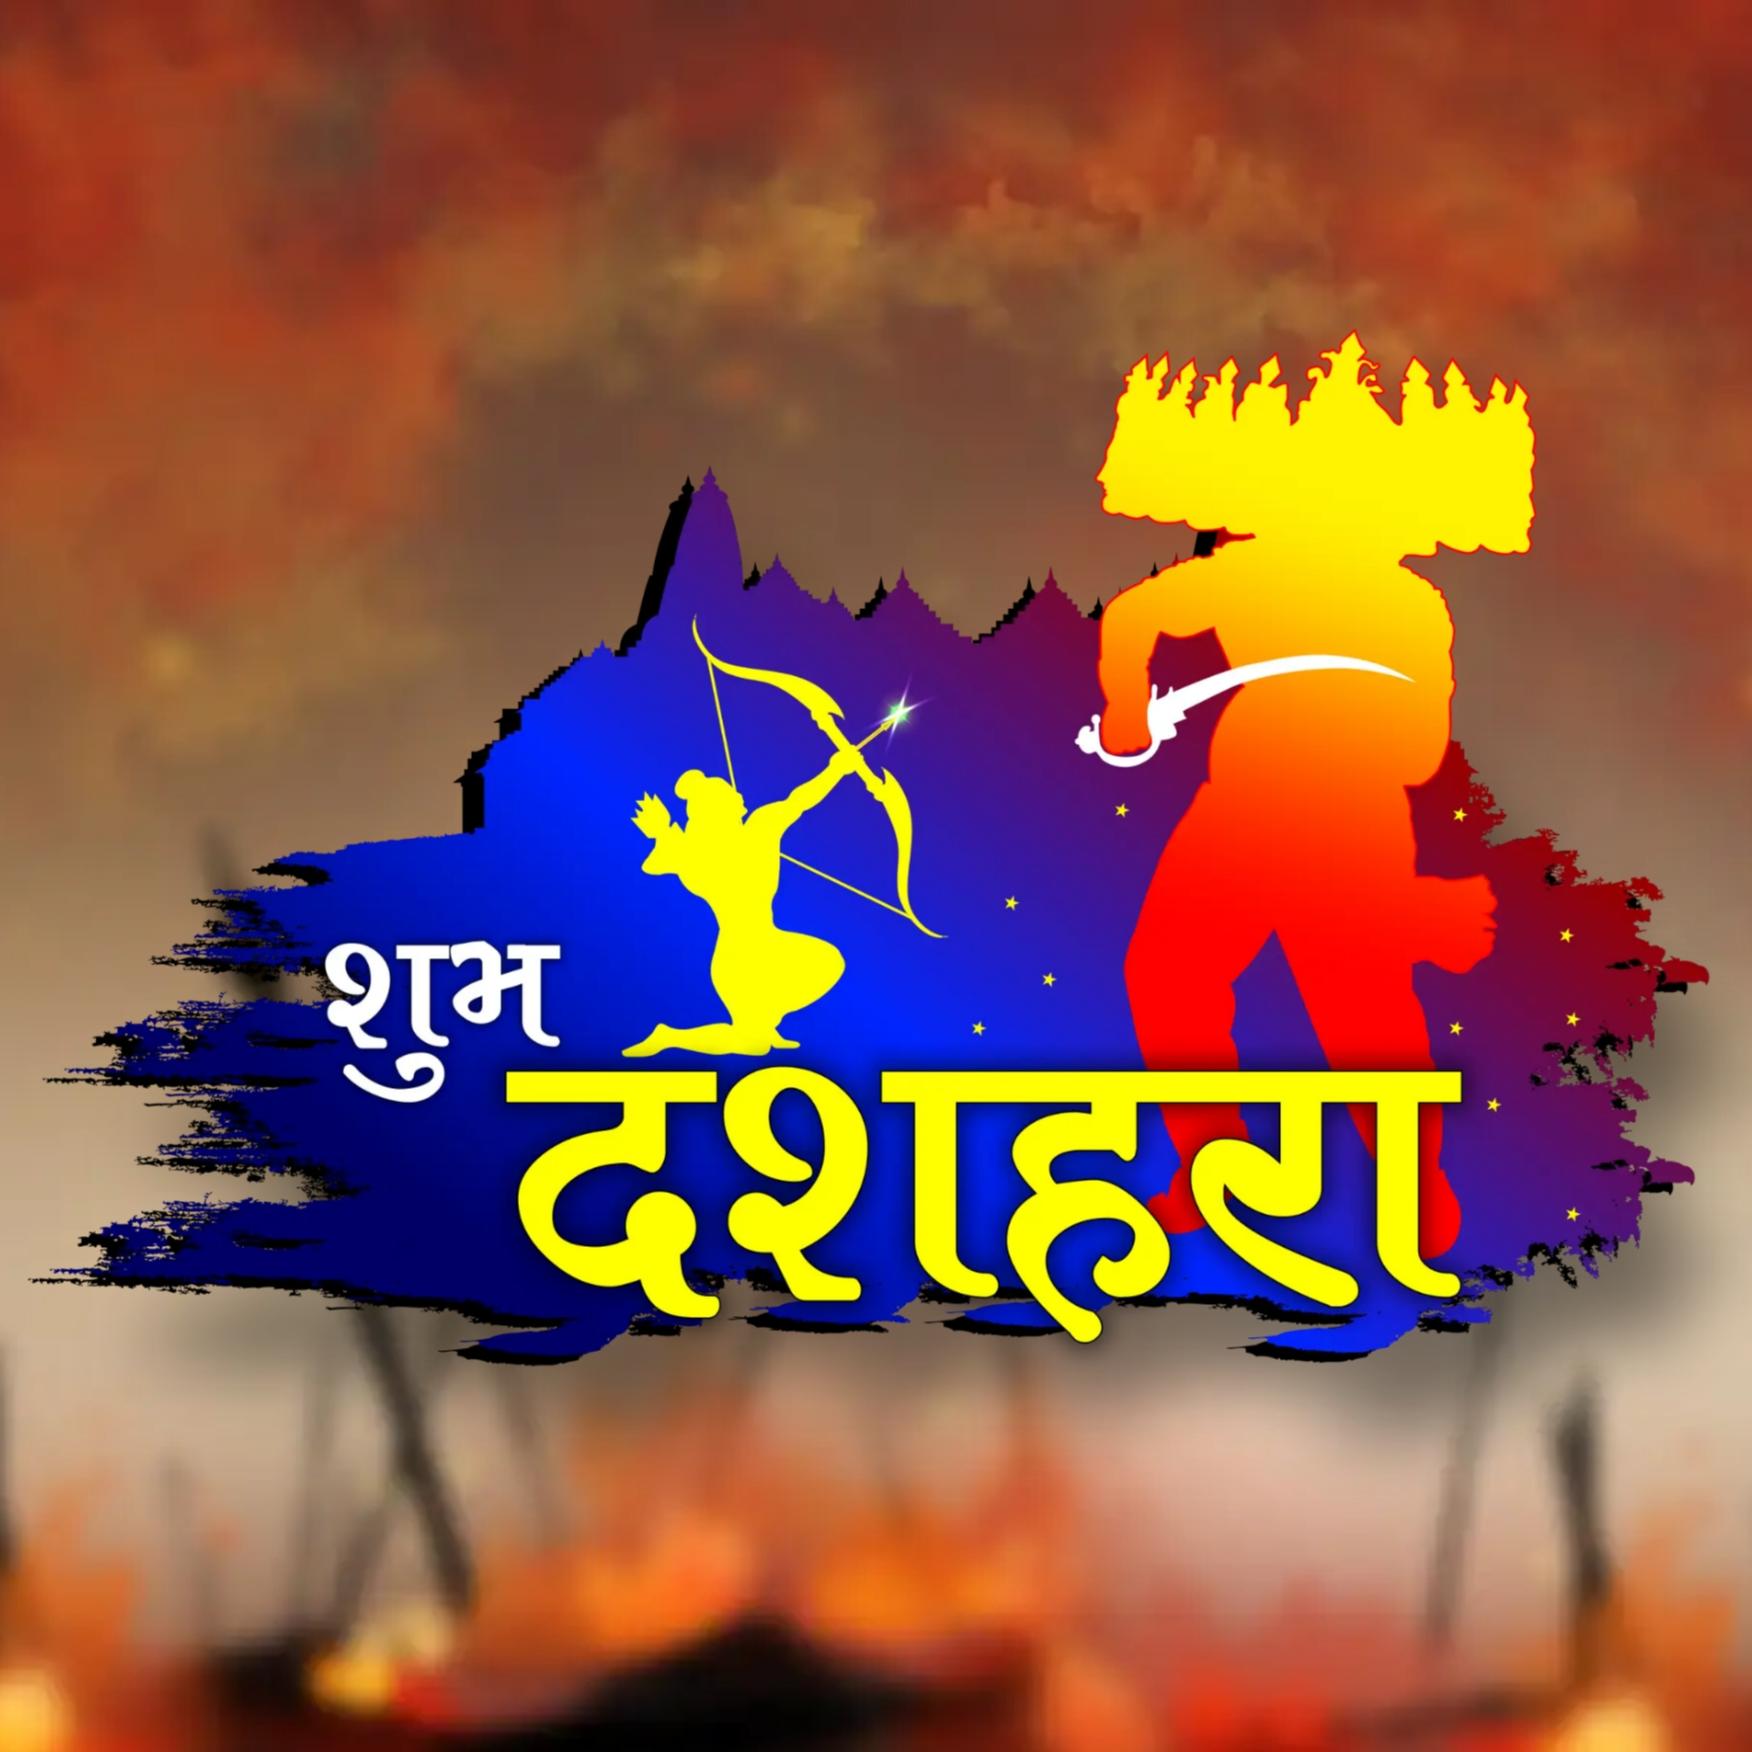 Shubh Dussehra Images in Hindi